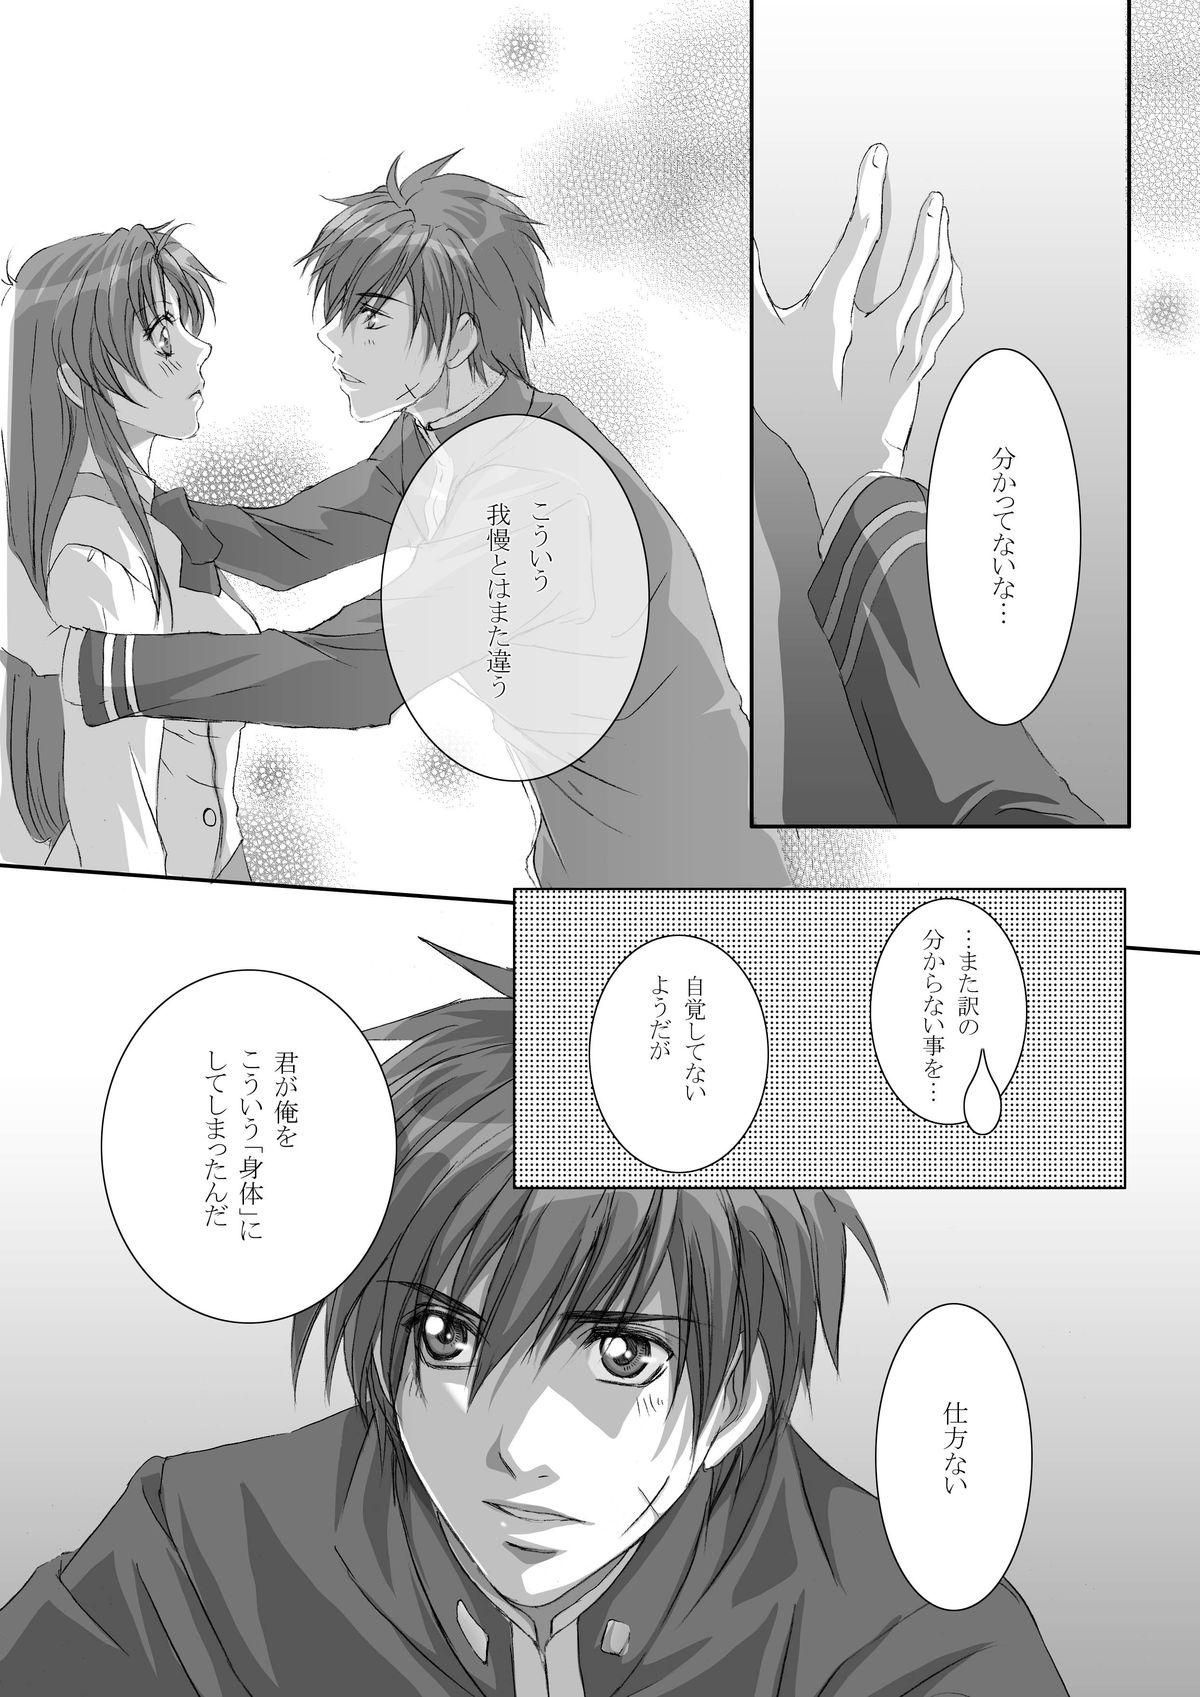 Grosso Anjel Seven A7 - Full metal panic Lesbiansex - Page 8